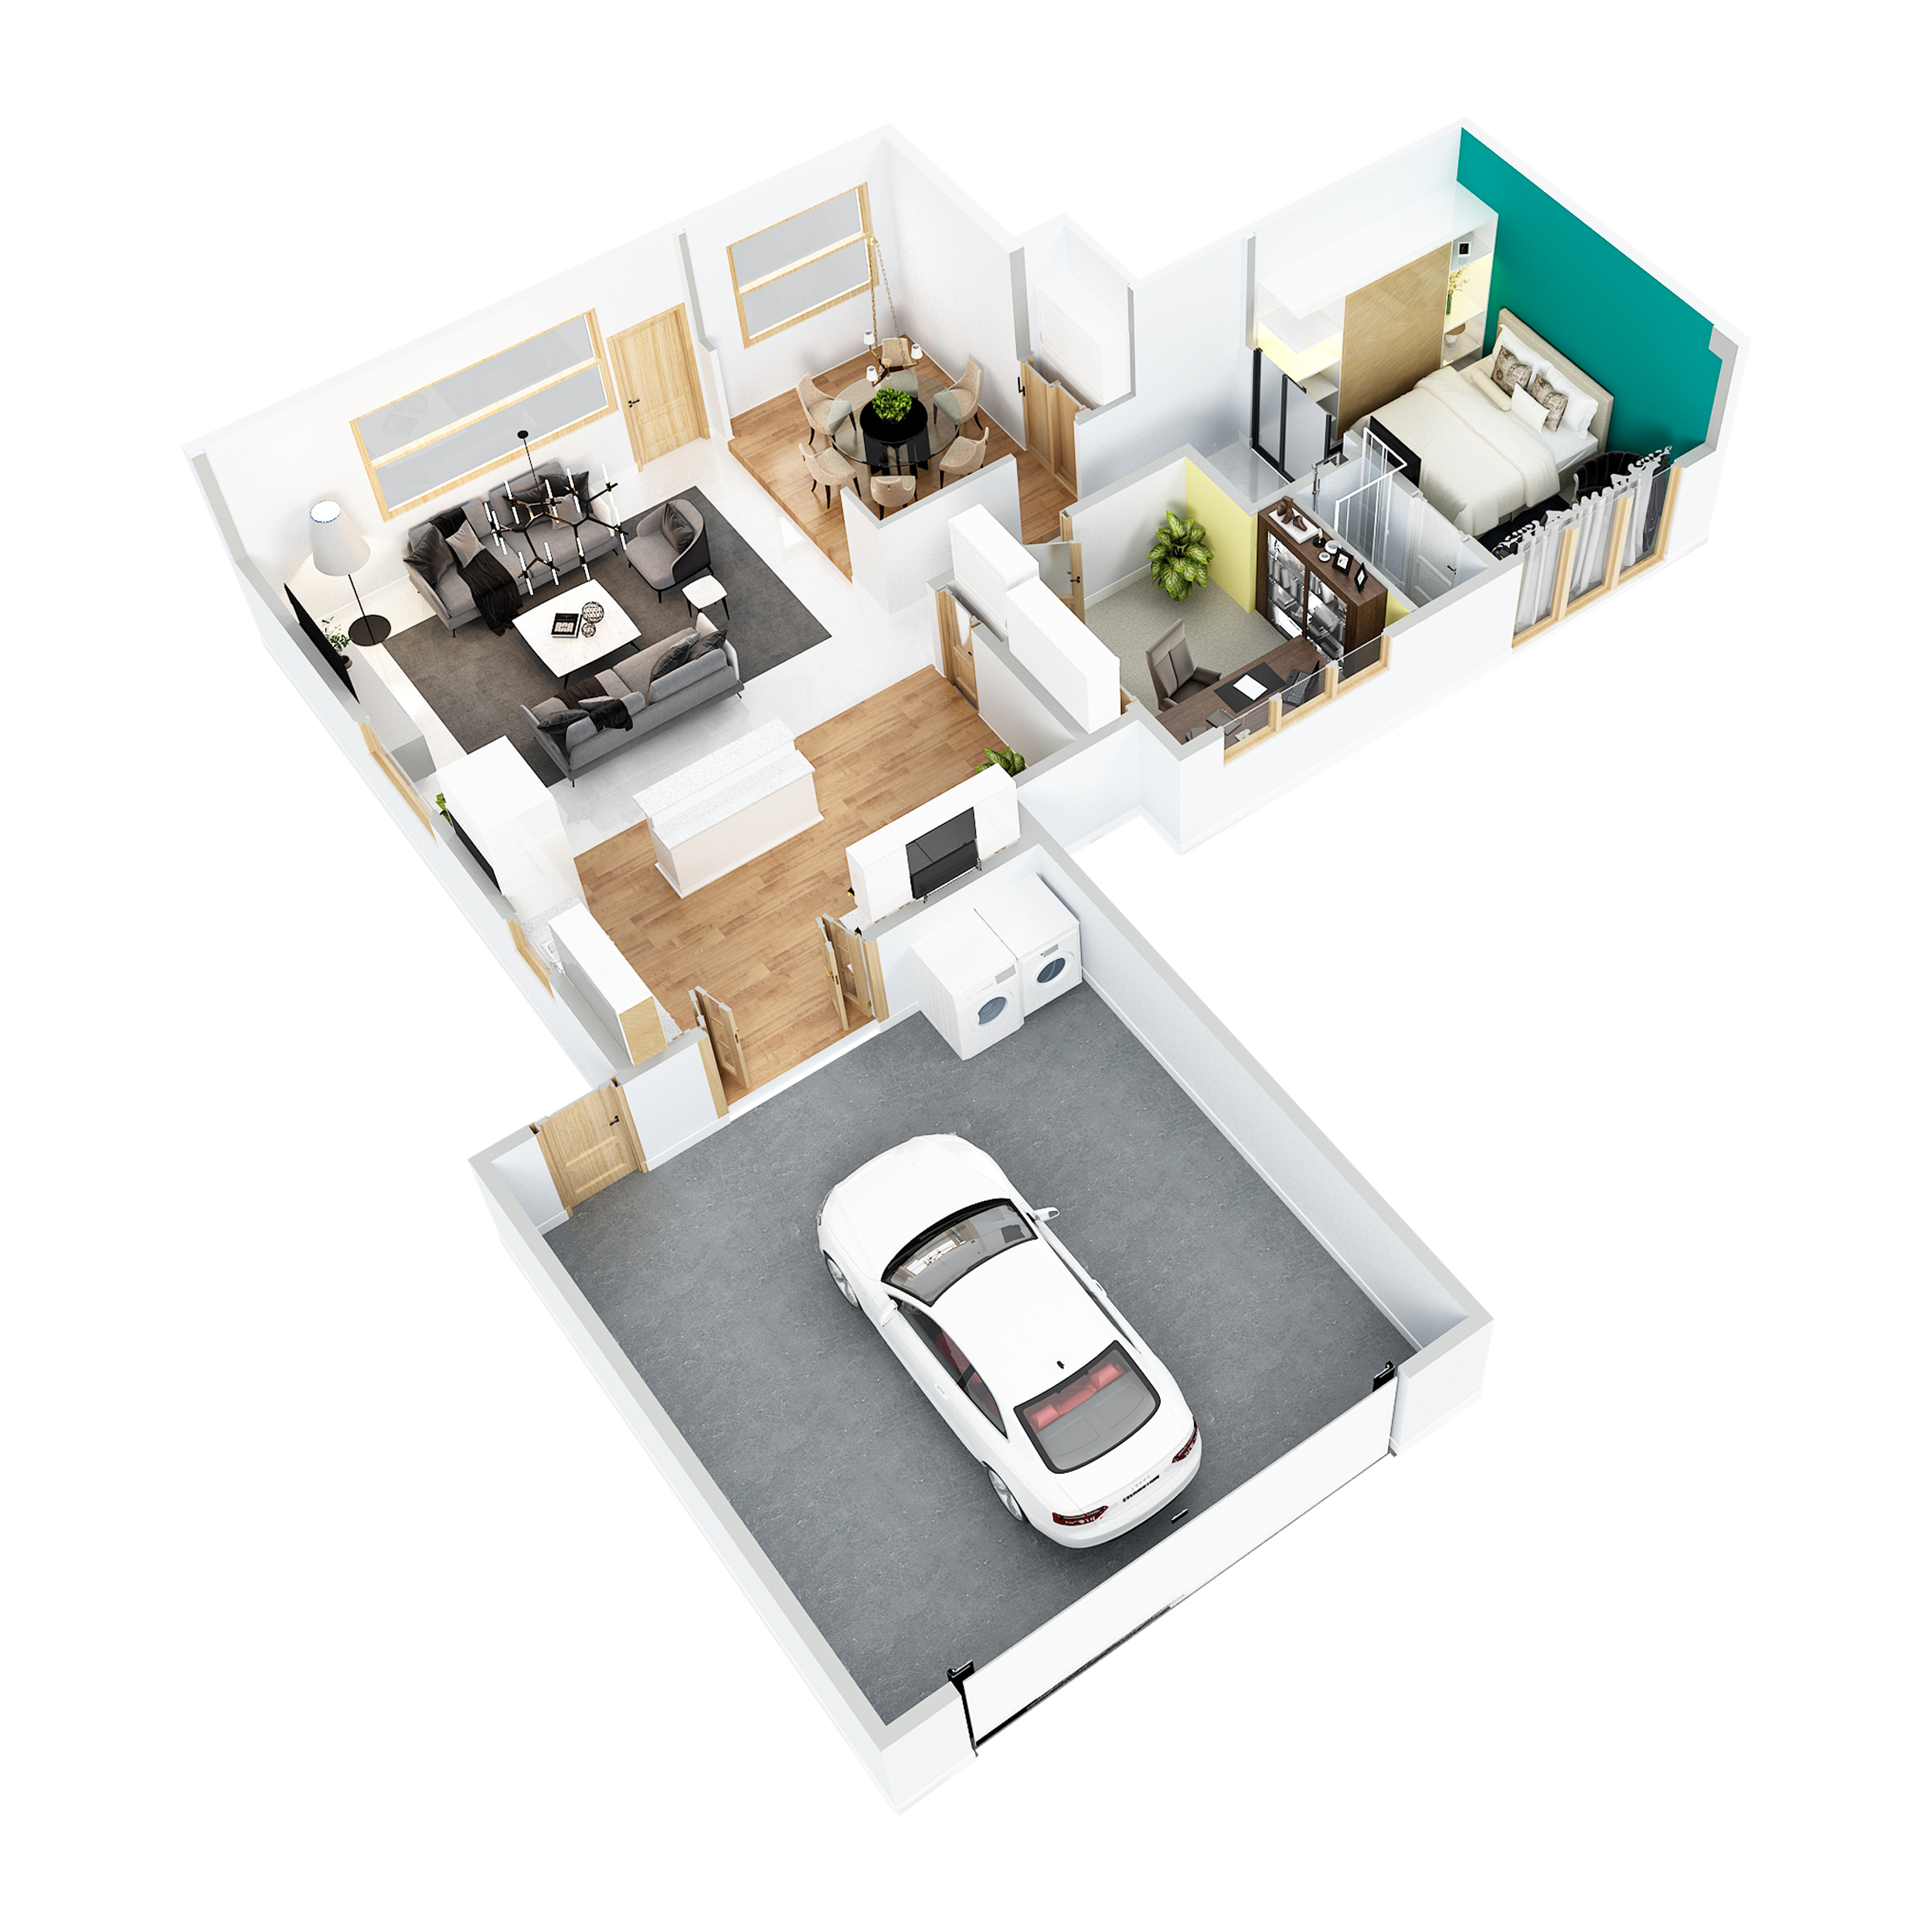 3D FLOOR PLANS: BRINGING YOUR PROPERTY DESIGN TO LIFE